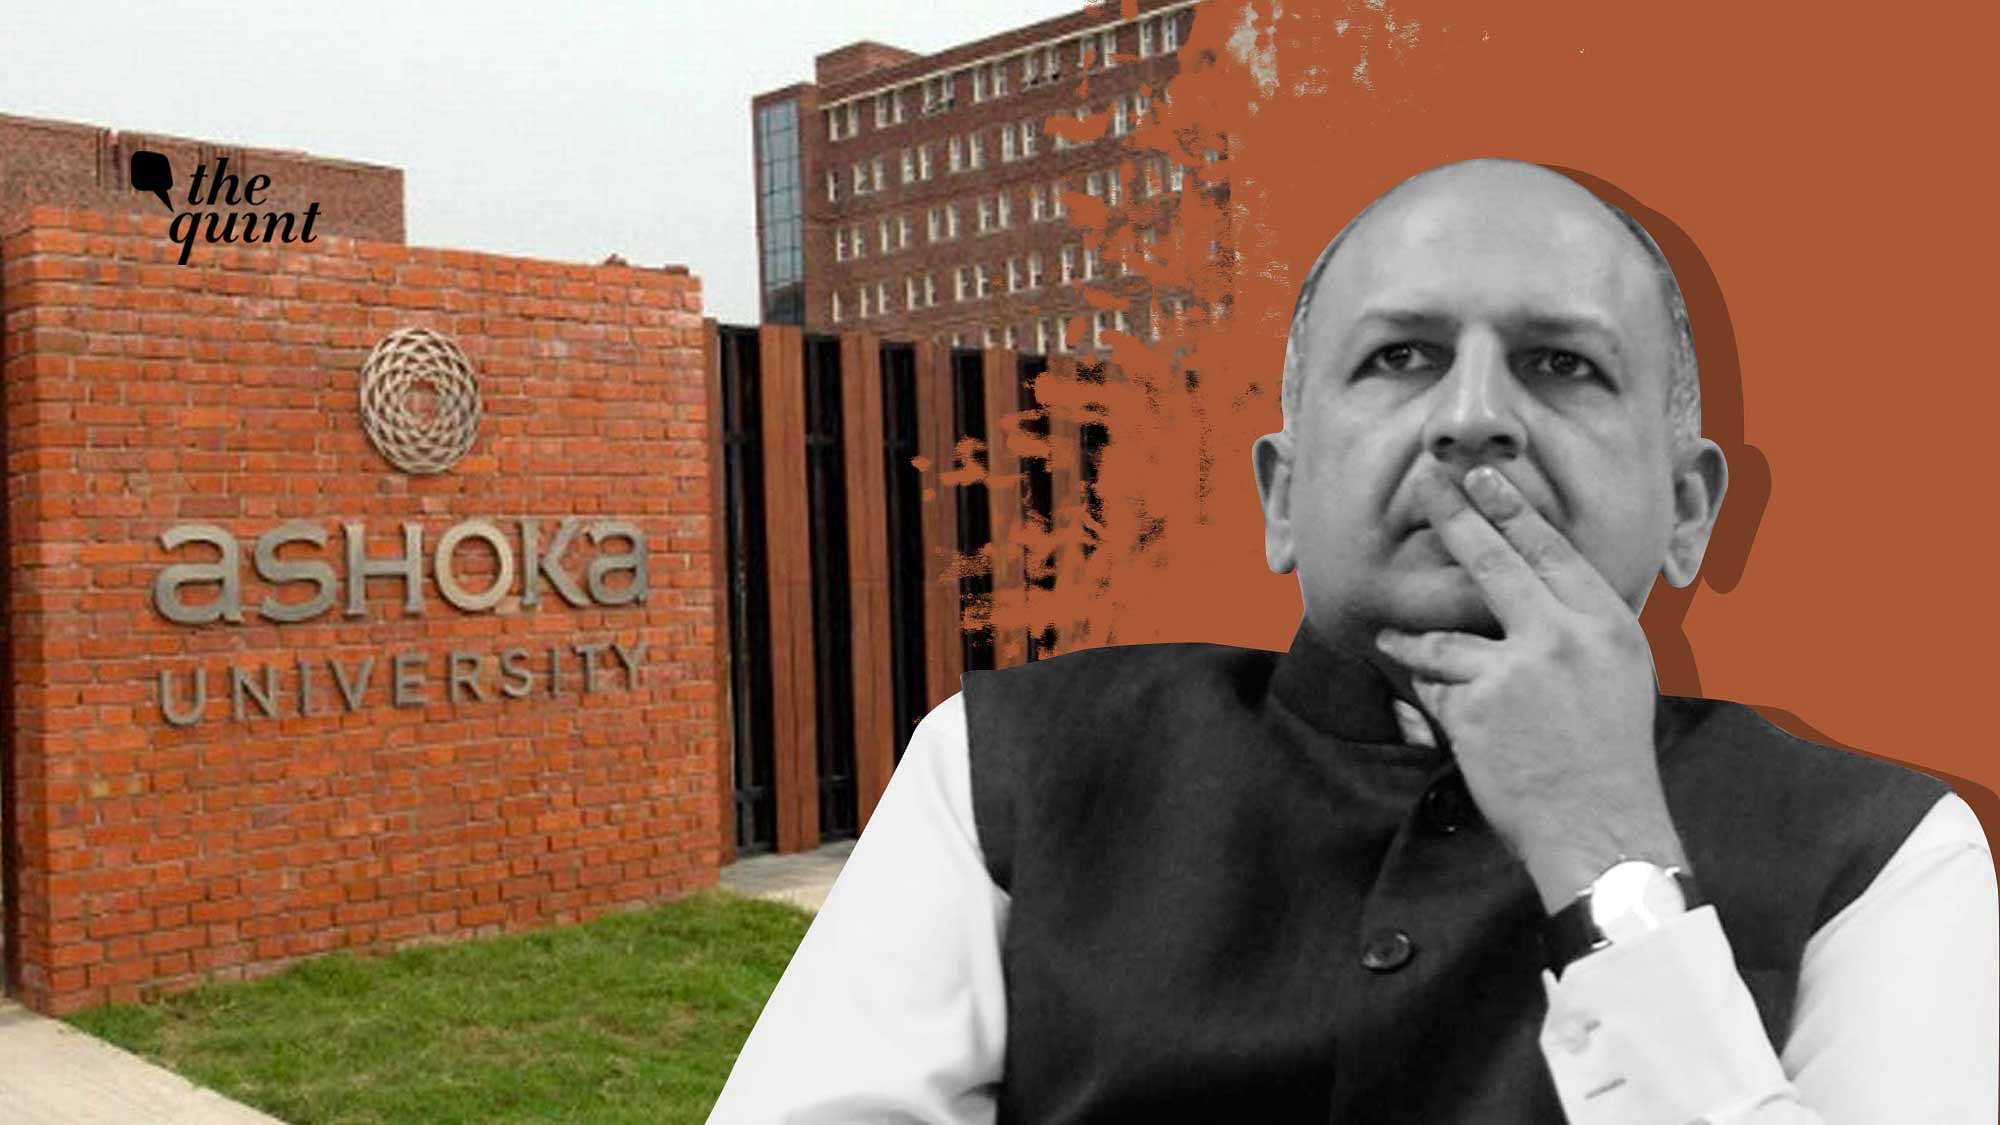 What led to PB Mehta’s resignation as professor at Ashoka University? And what has been the fallout of his decision?